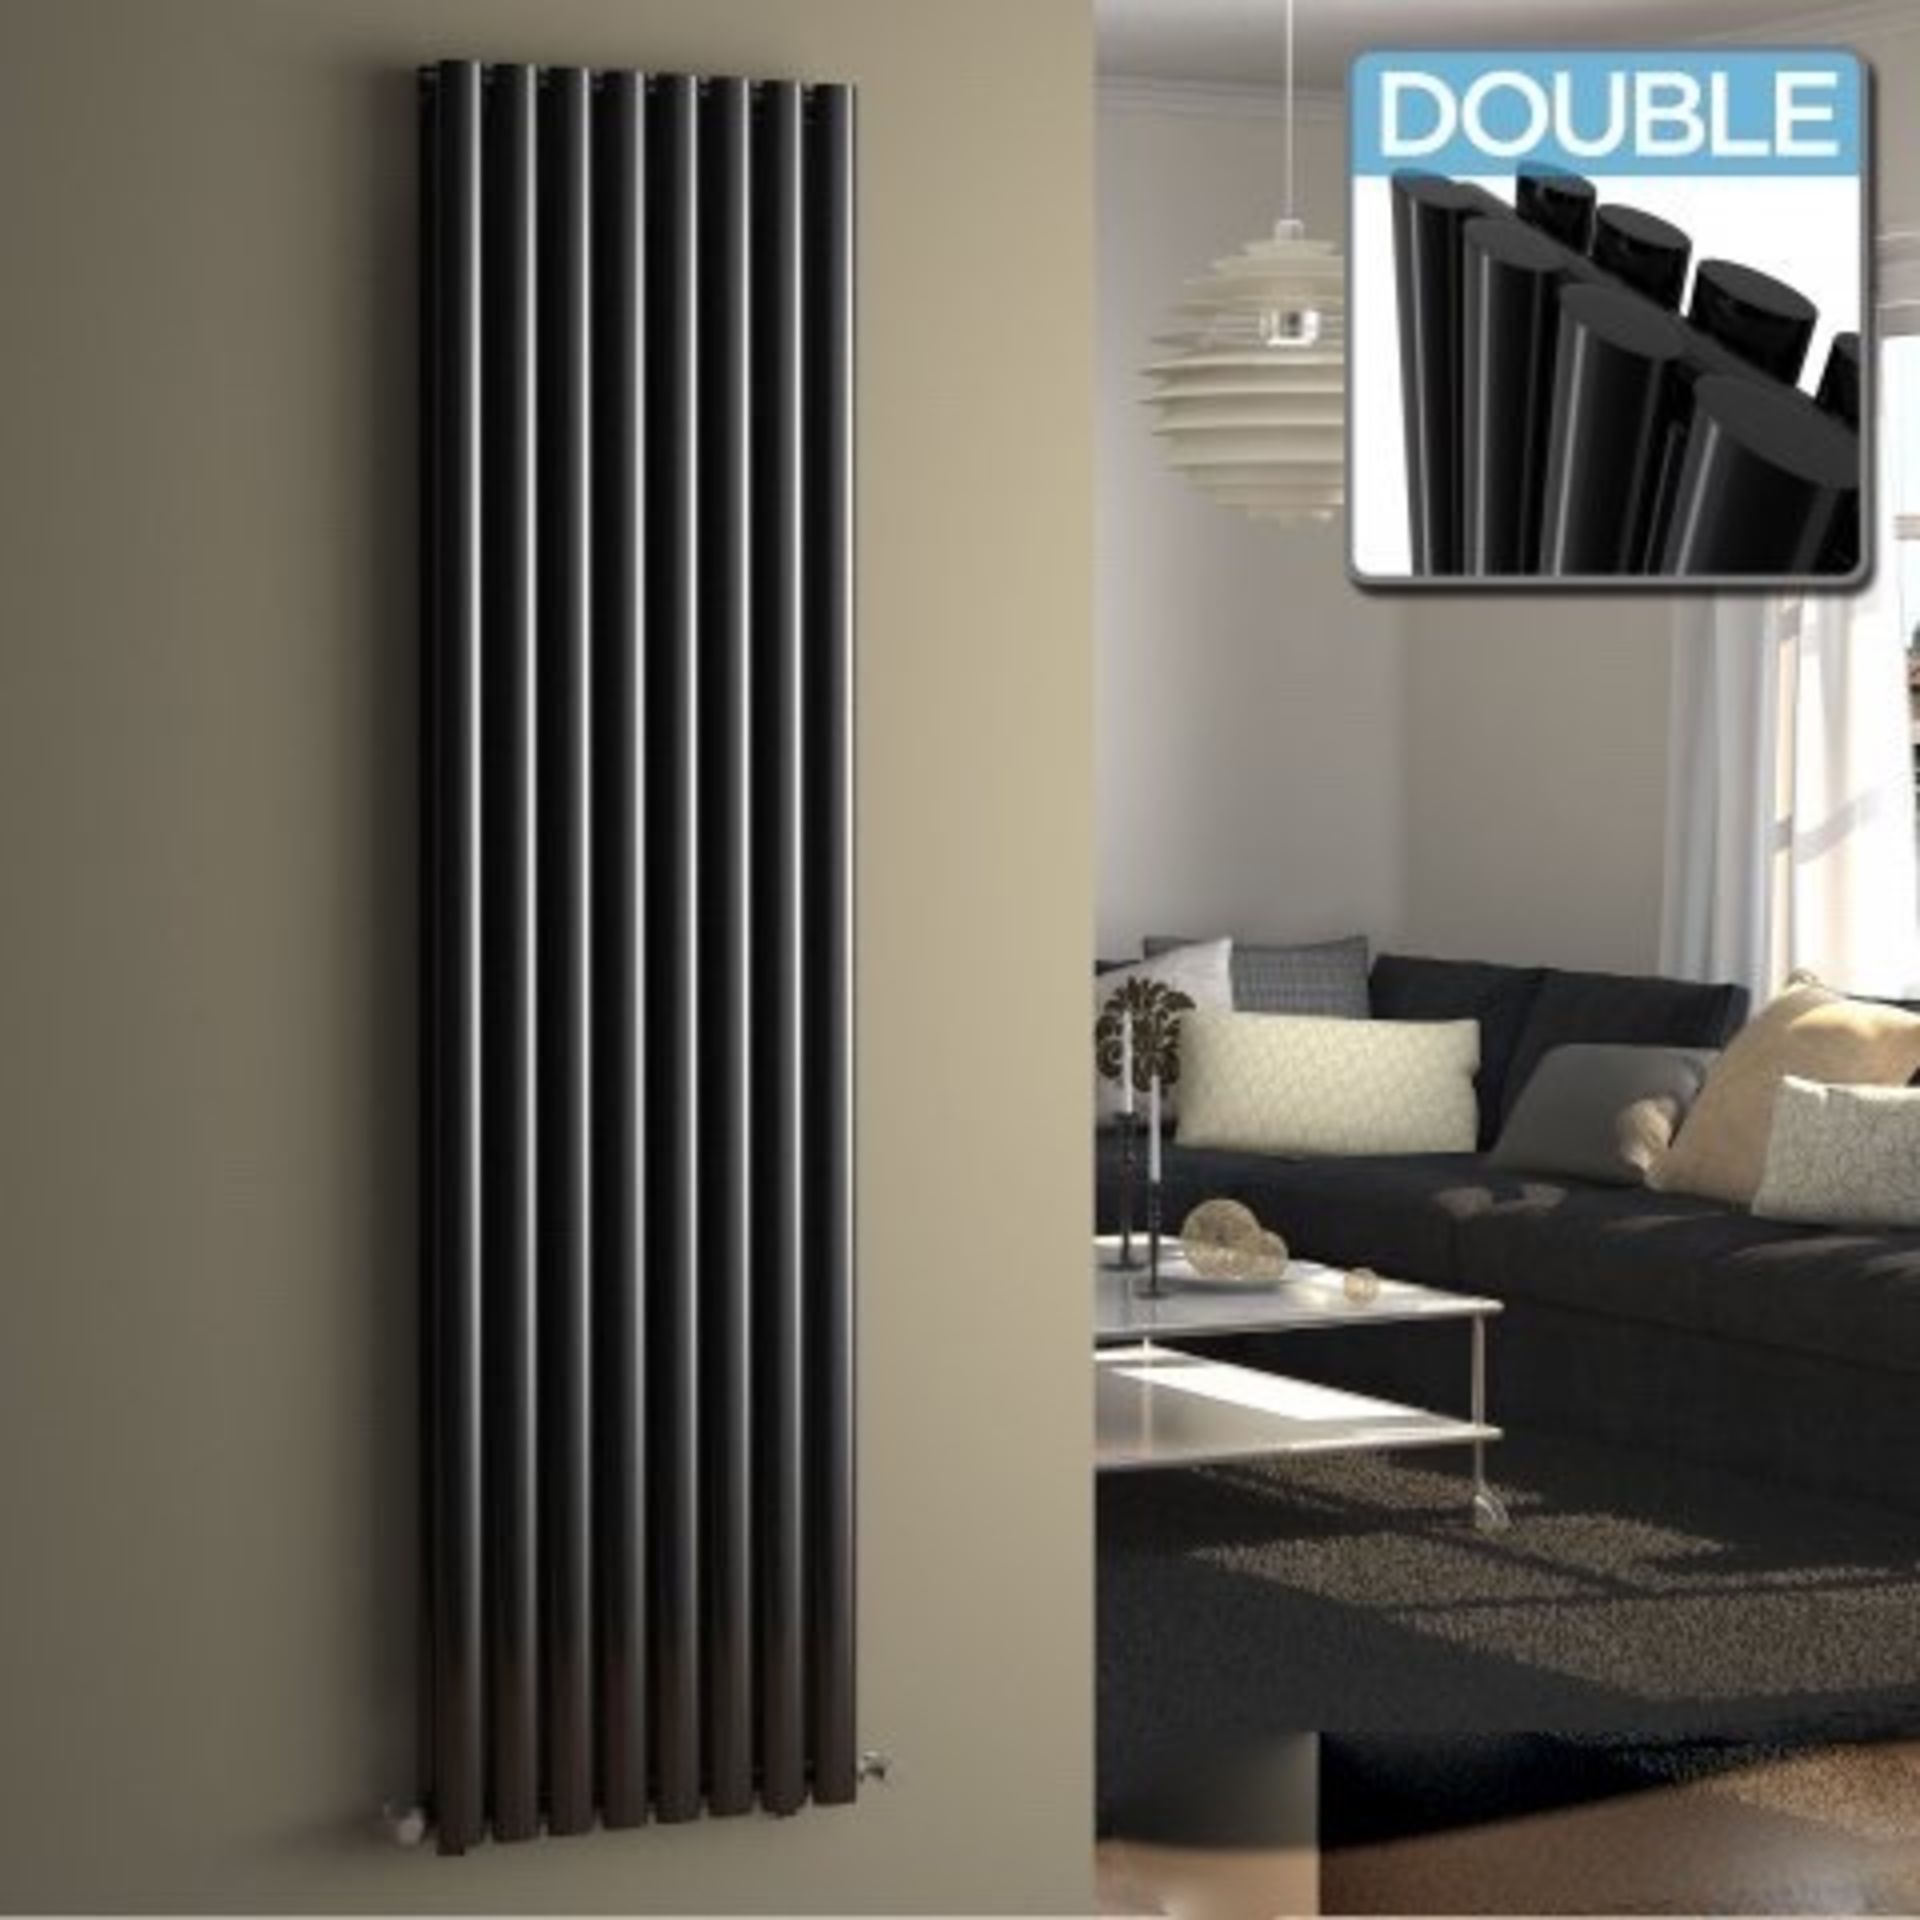 A41 - 1800x480mm Black Double Oval Tube Vertical Radiator - Ember Premium. RRP £319.99. Want to